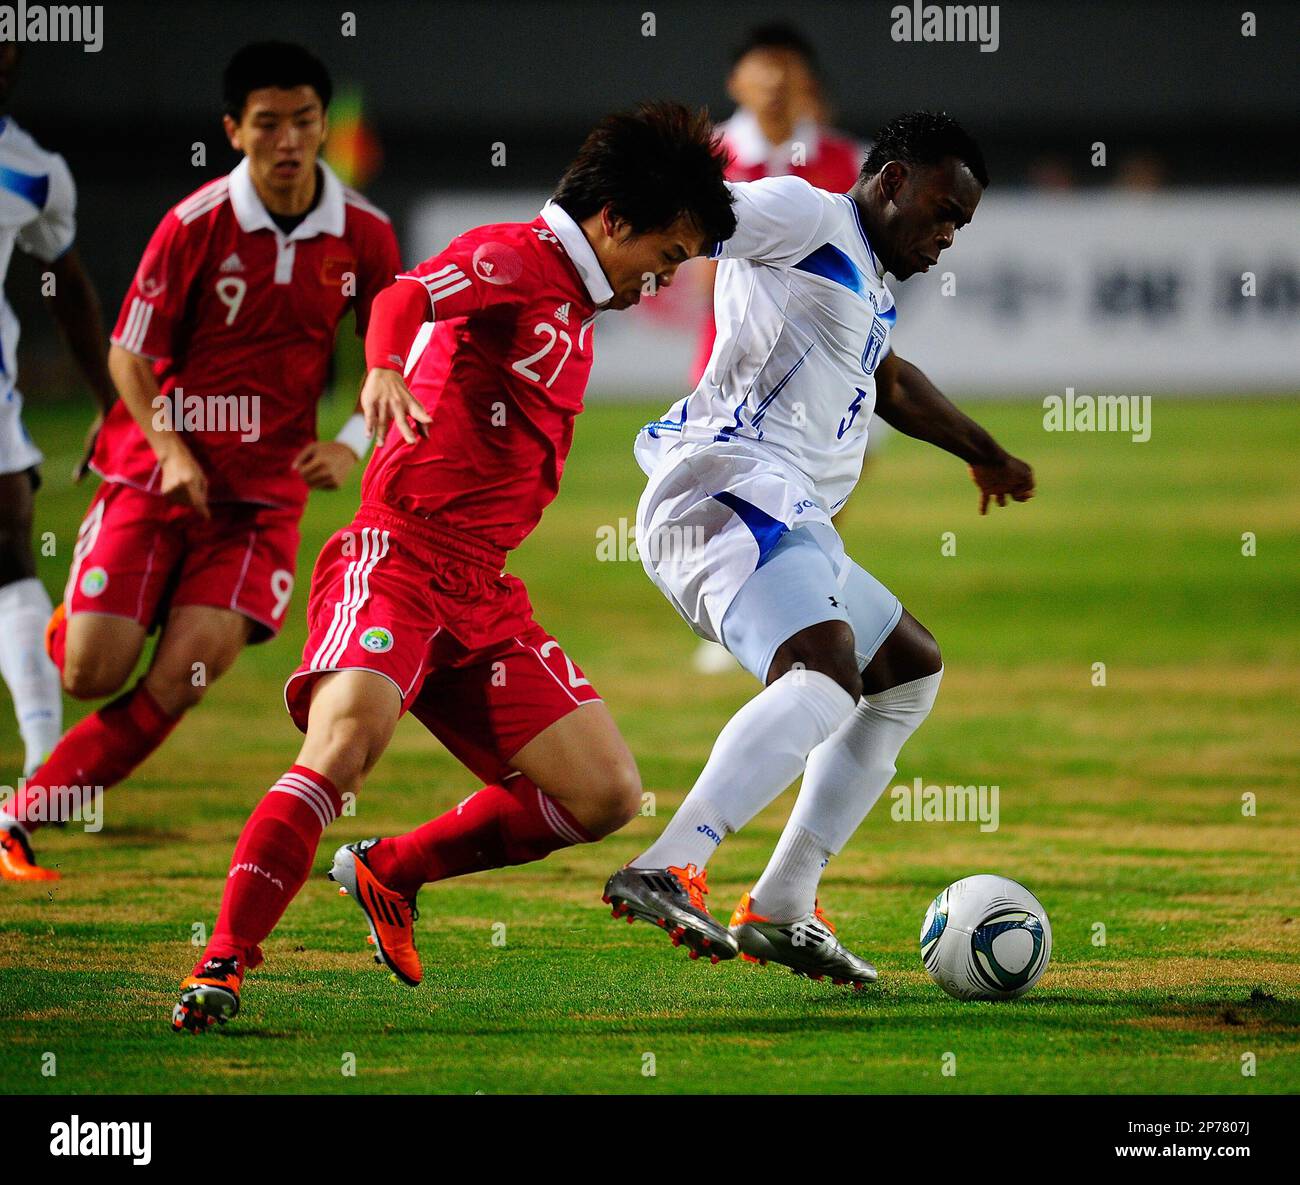 China's Deng Zhuoxiang ( C) vies with Honduras' Erick Norales ( R) during a warmup football match in Wuhan in central China's Hubei province on Tuesday, March 29, 2011. China defeated Honduras 3-0.(Photo By Zhou Guoqiang/Color China Photo/AP Images) Stock Photo